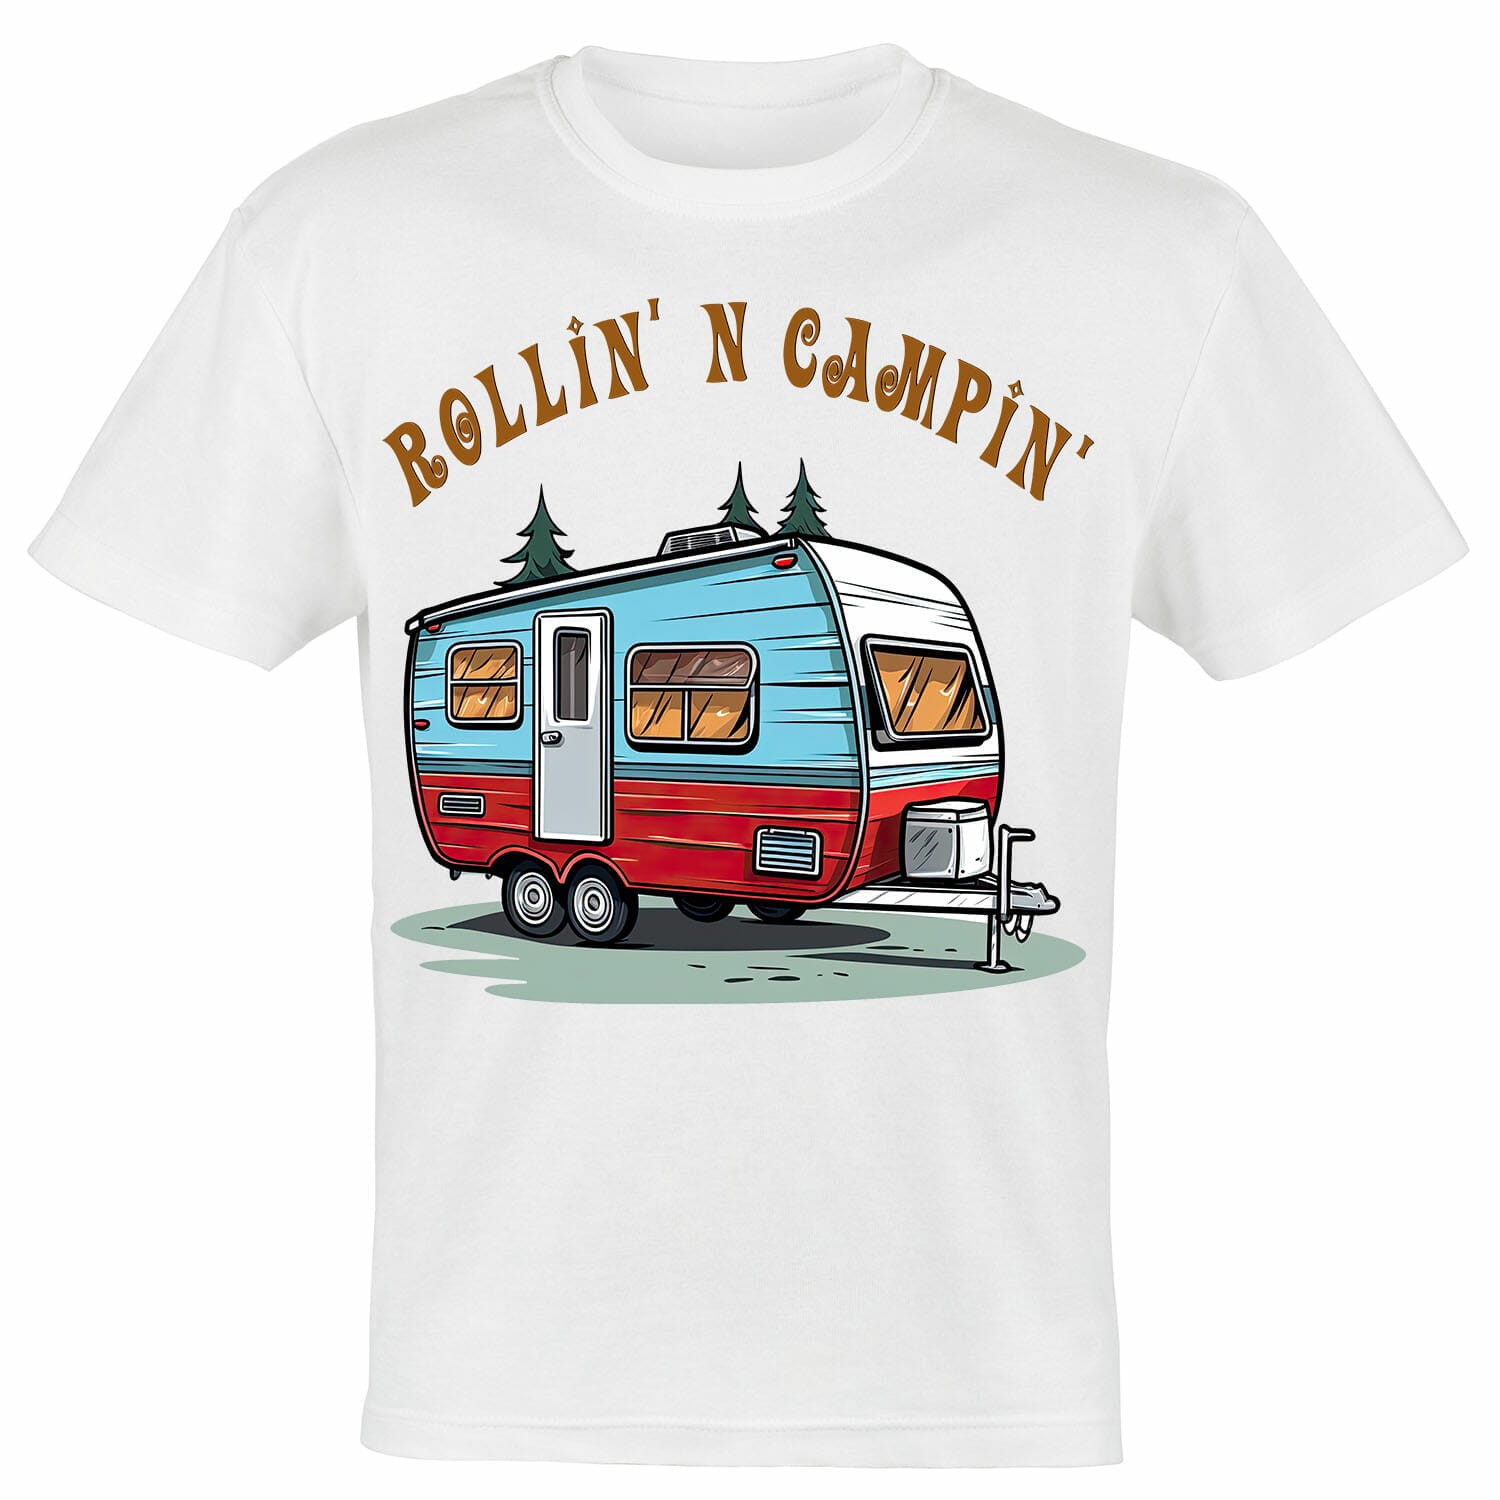 Rollin N Campin T-shirt Design For Camping